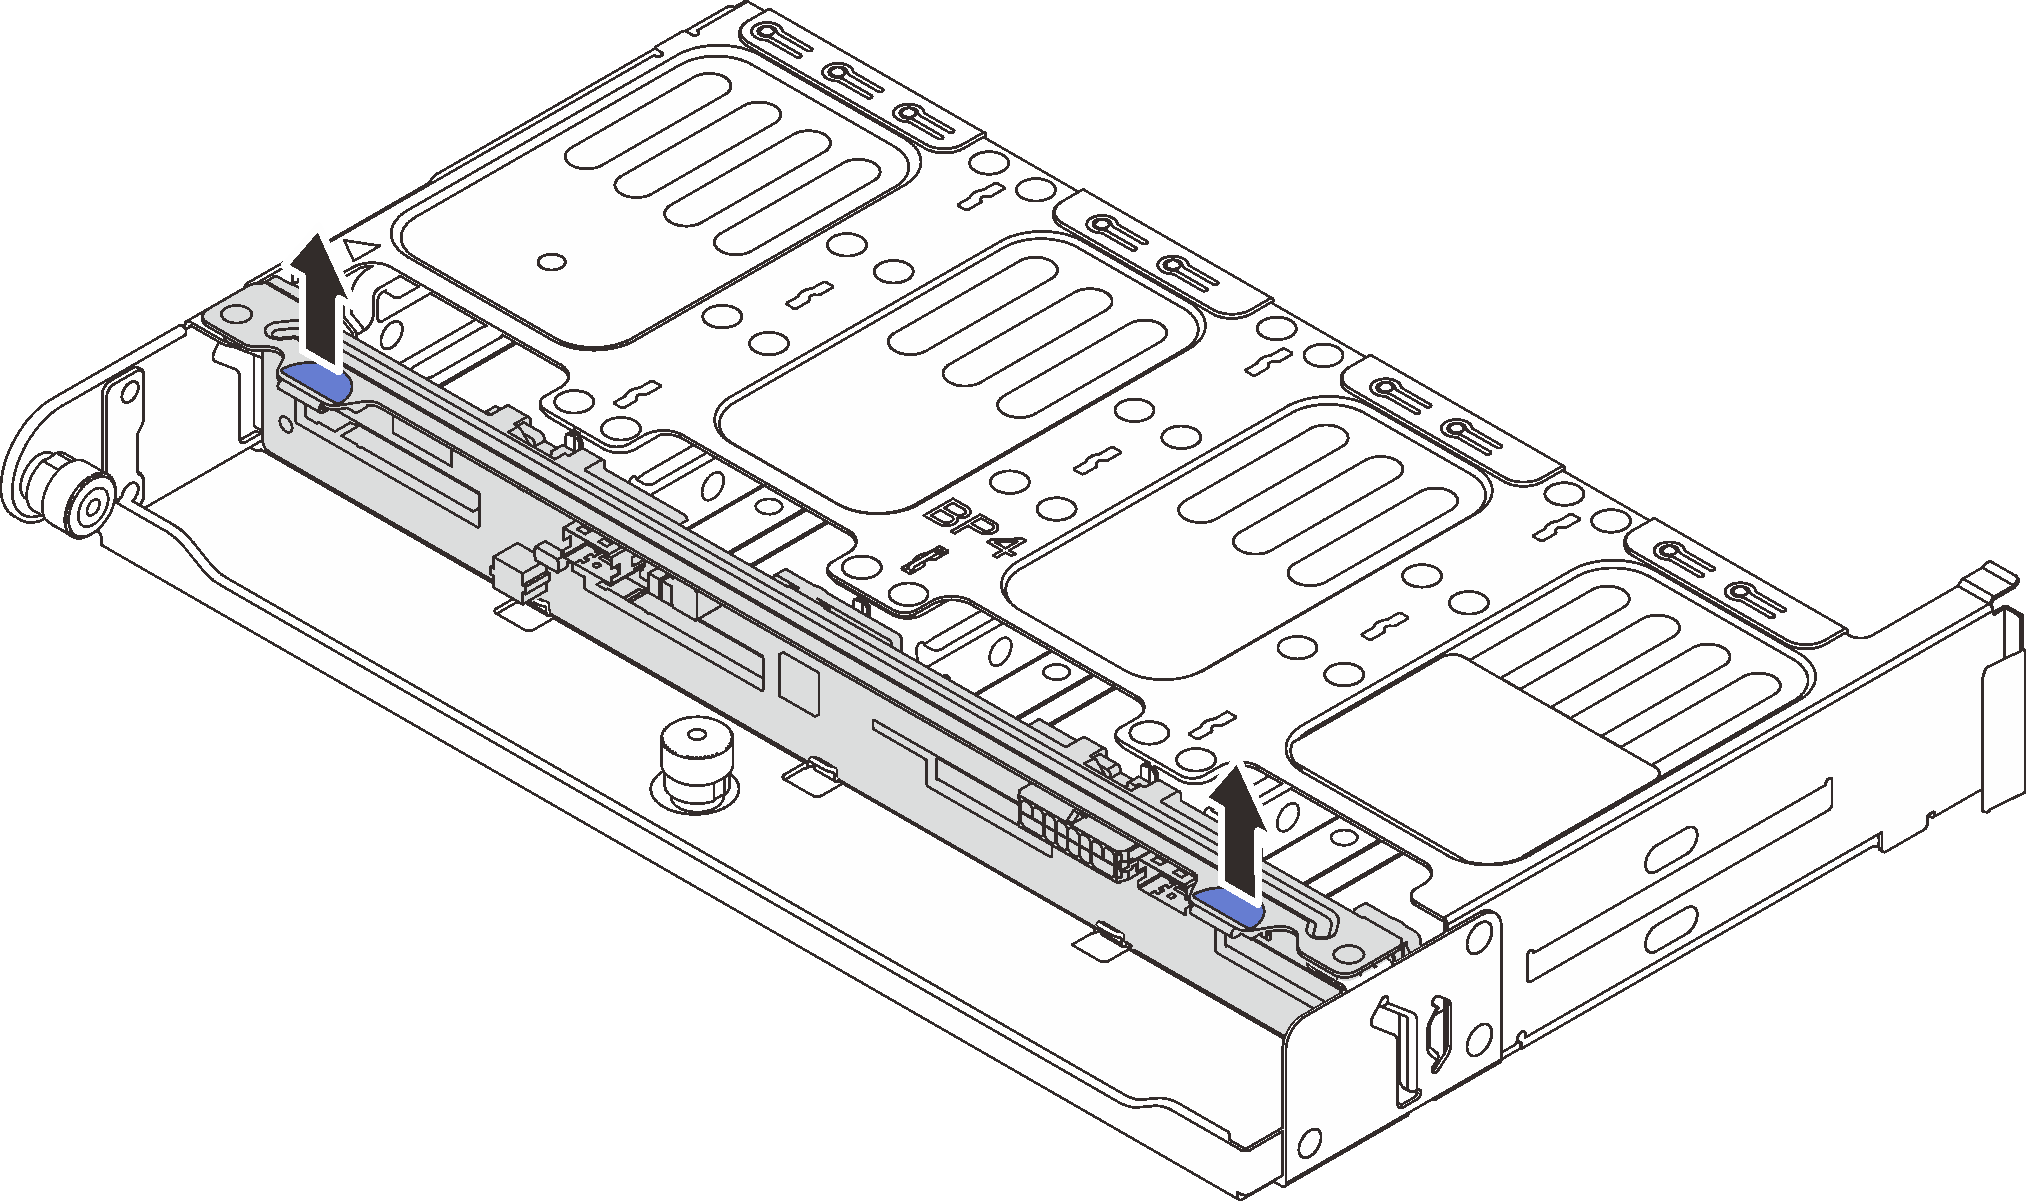 Removing the rear 8 x 2.5-inch drive backplane